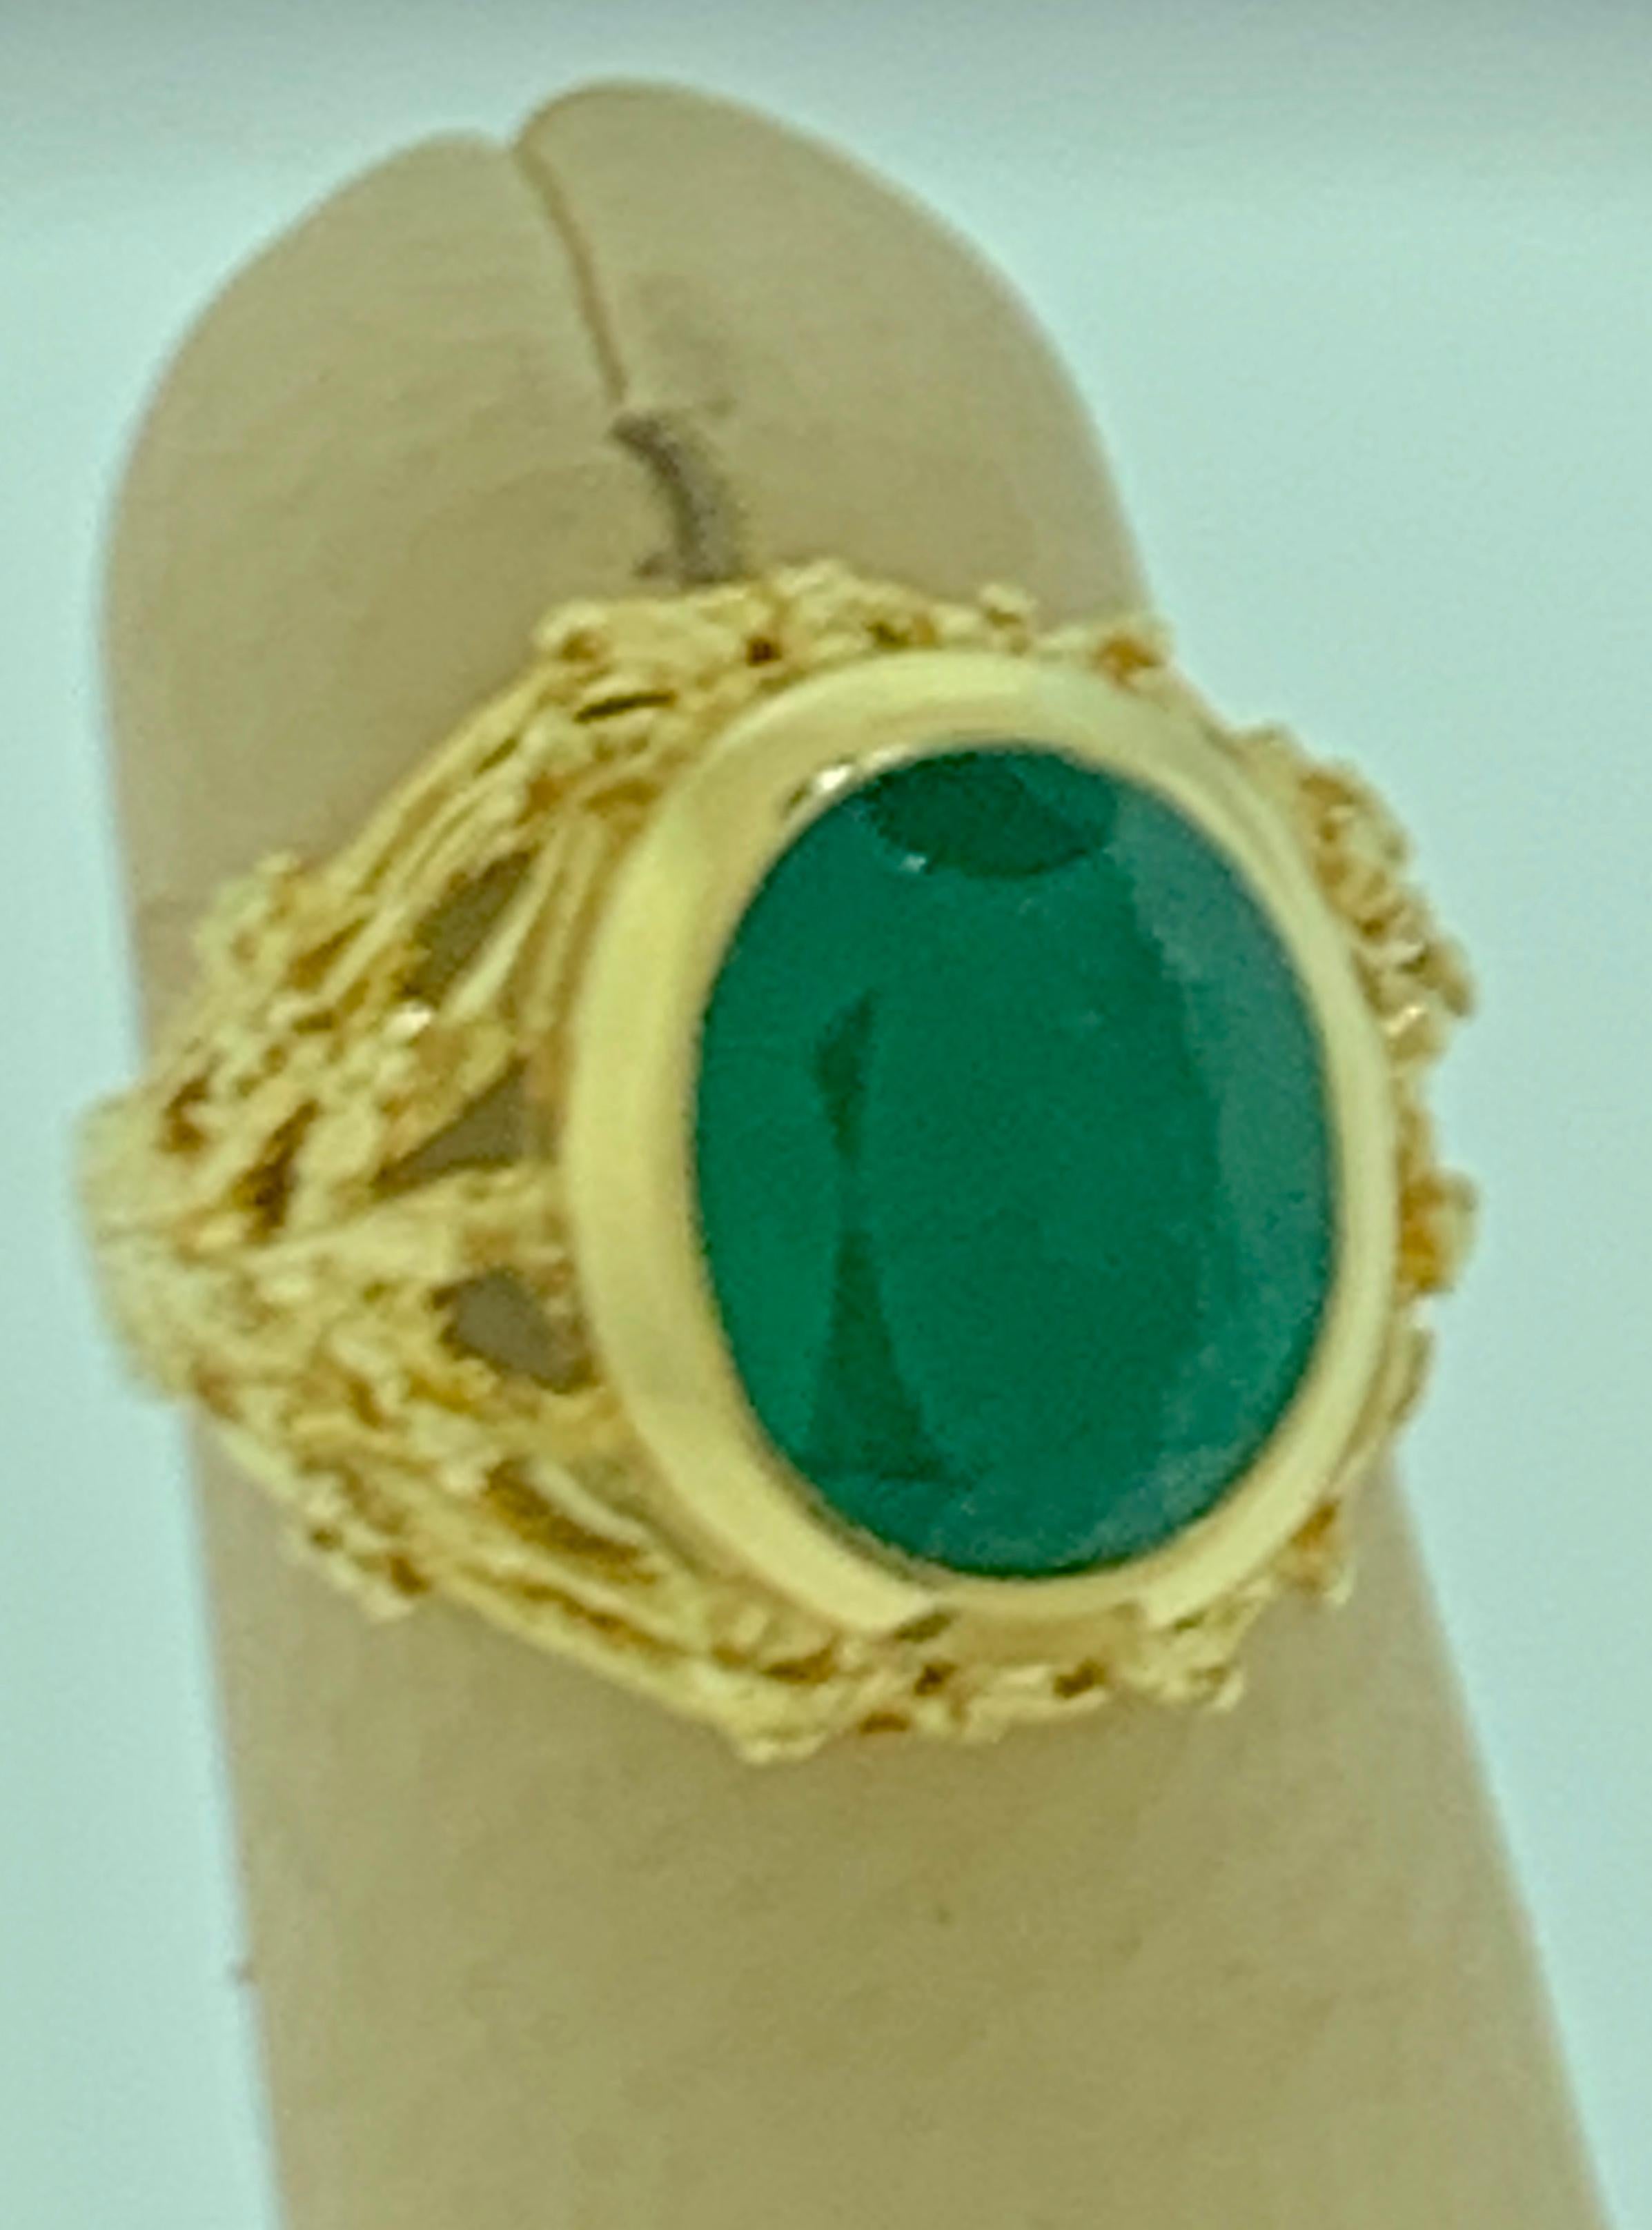 
10 X 12 MM Oval Cut approximately 7 Ct Natural Emerald Ring 18 Karat Yellow Gold Size 4.5
Oval shape Emerald Ring
Natural Emeralds are very precious , Very Difficult to find and getting more more difficult to find.
A classic, Cocktail ring 
Emerald